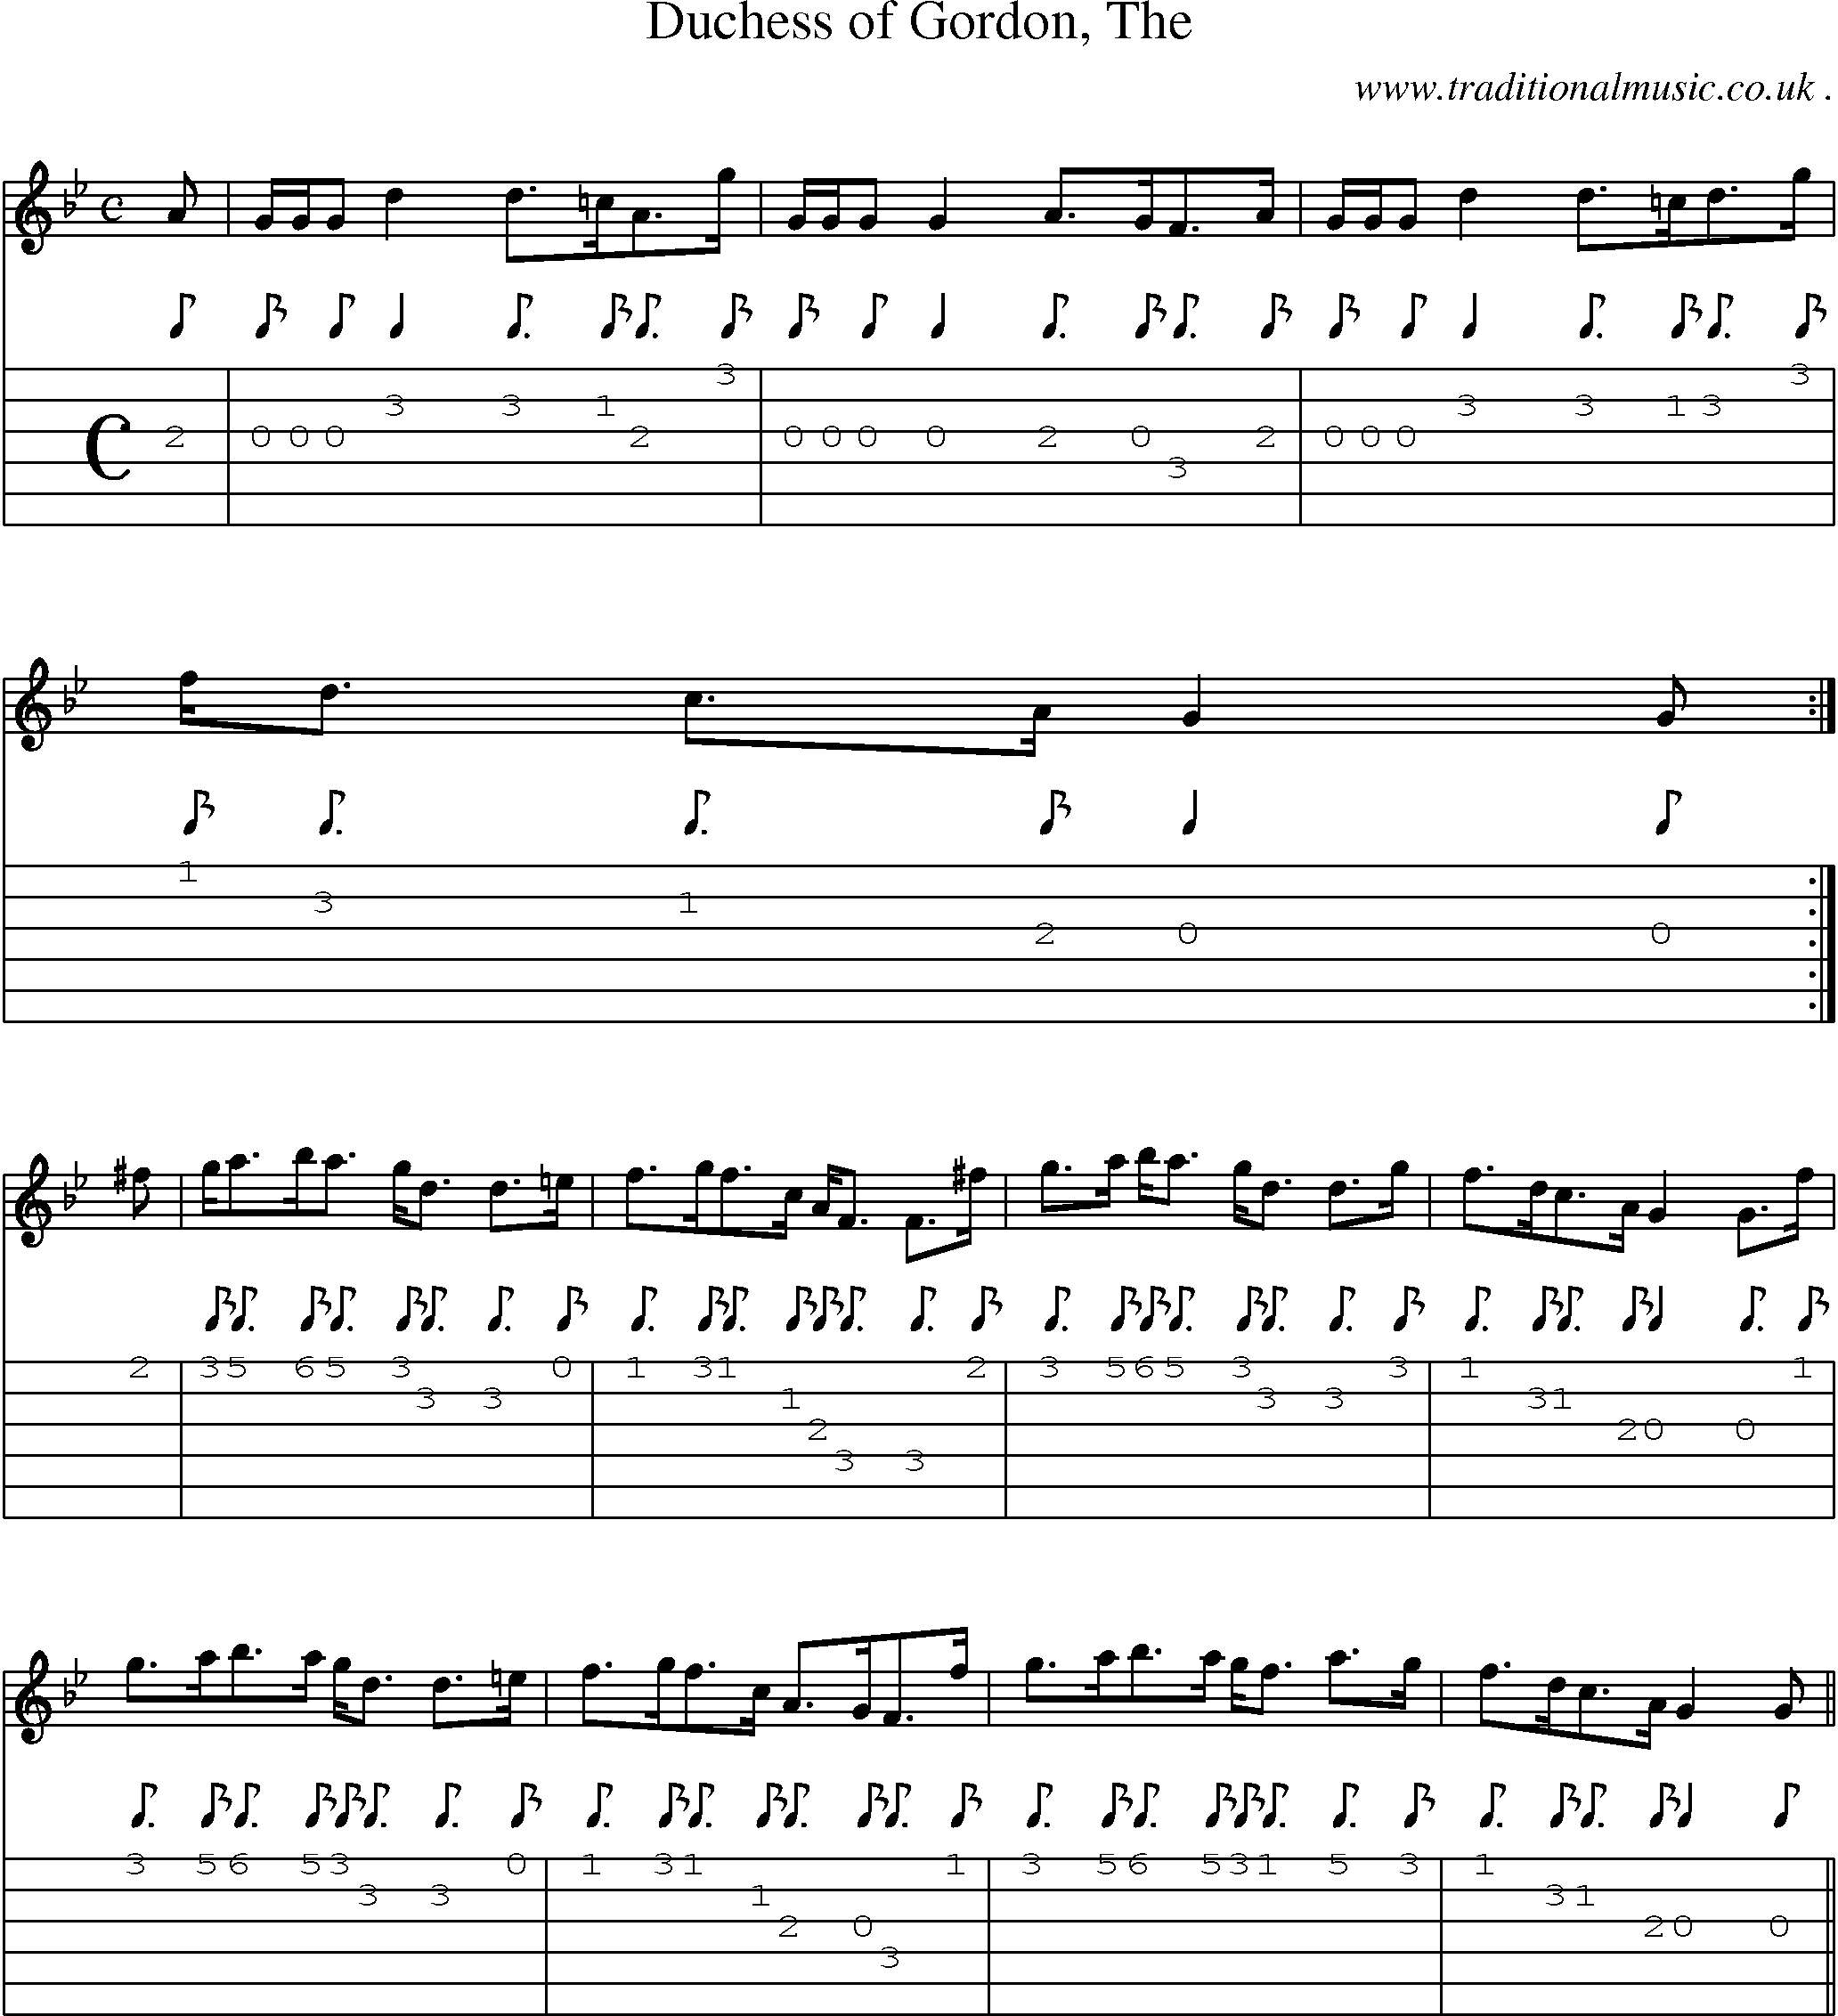 Sheet-music  score, Chords and Guitar Tabs for Duchess Of Gordon The